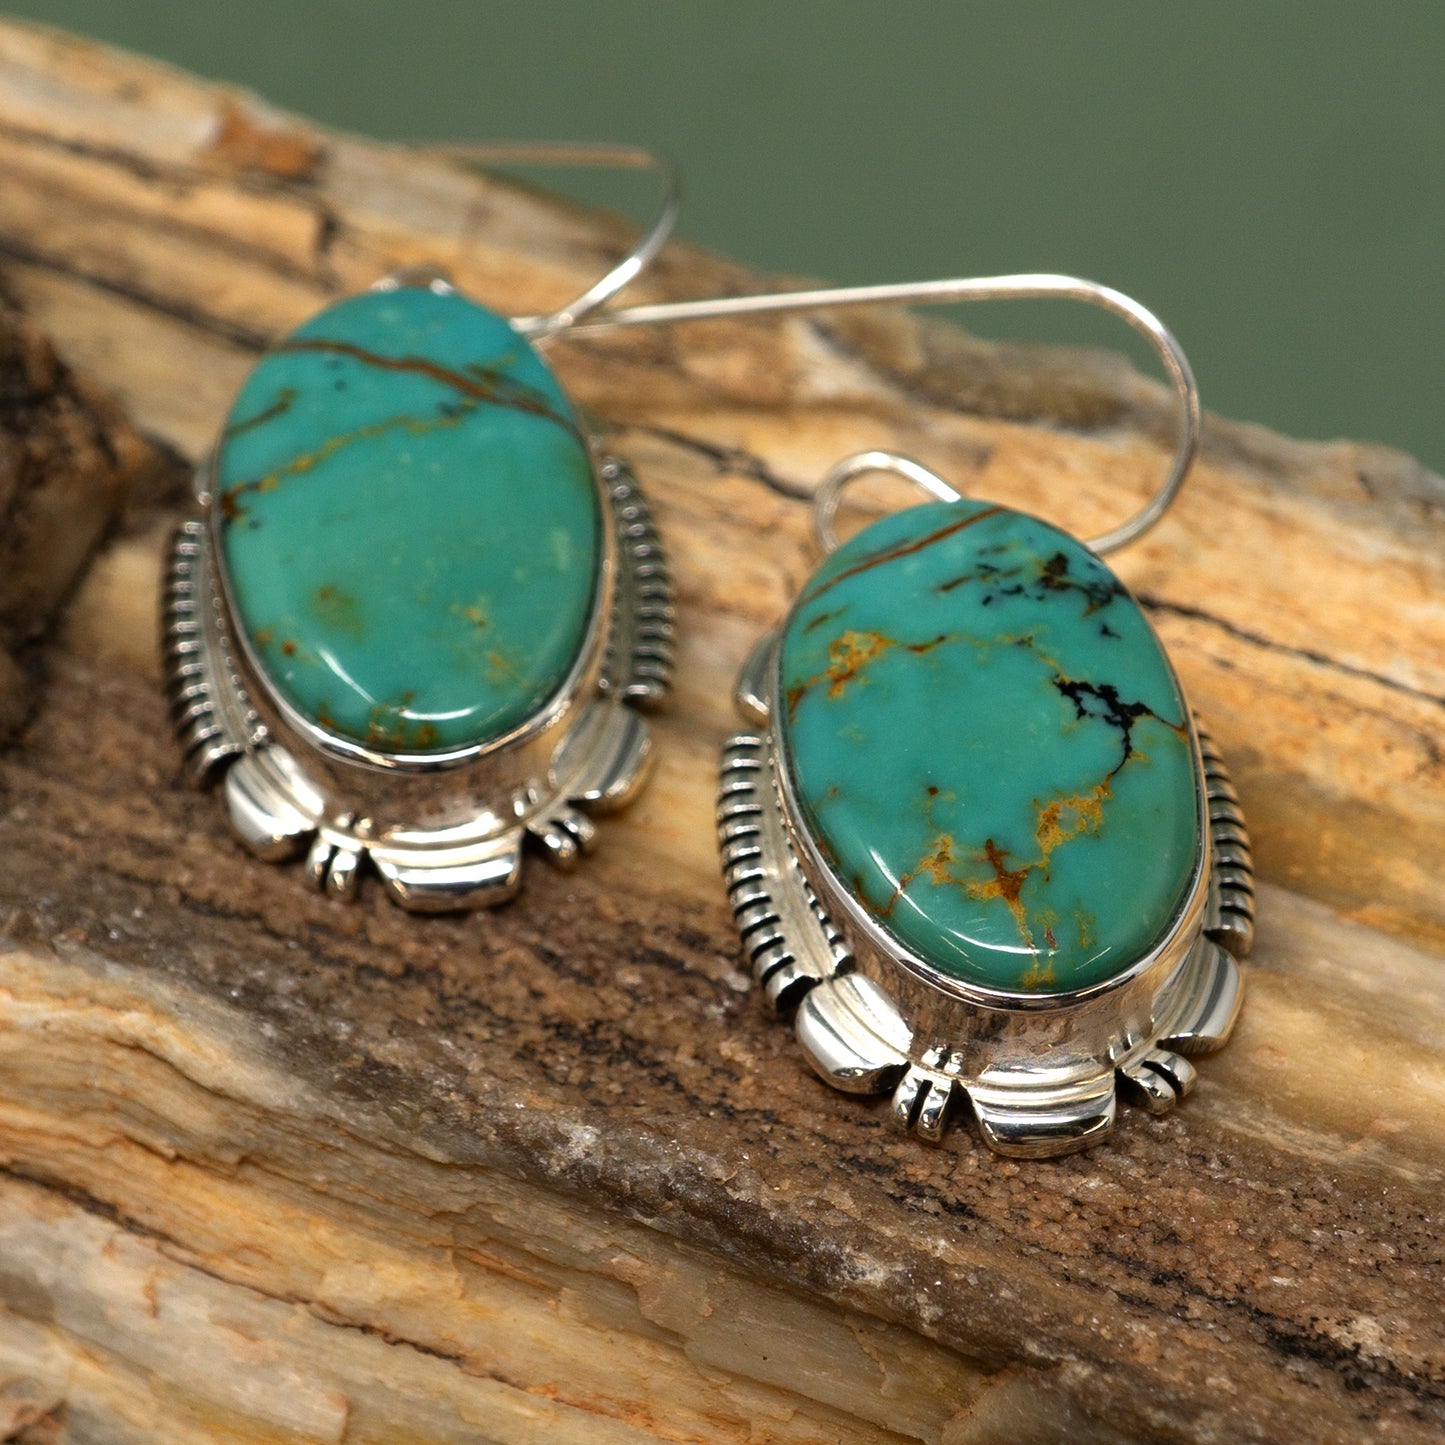 Sonoran Gold Turquoise Earrings in Sterling Silver | Hook Style